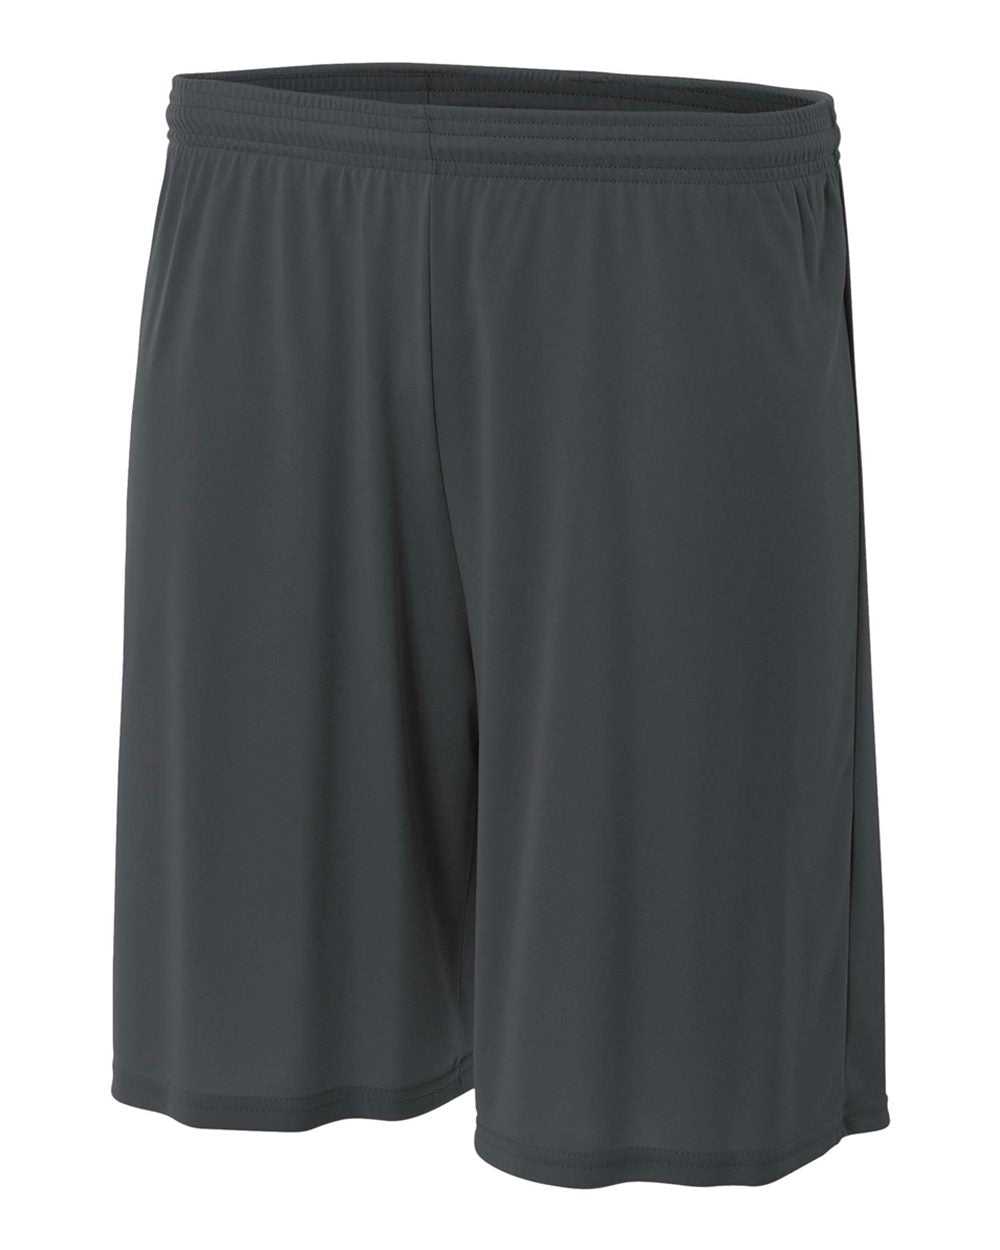 A4 N5244 7" Cooling Performance Short - Graphite - HIT a Double